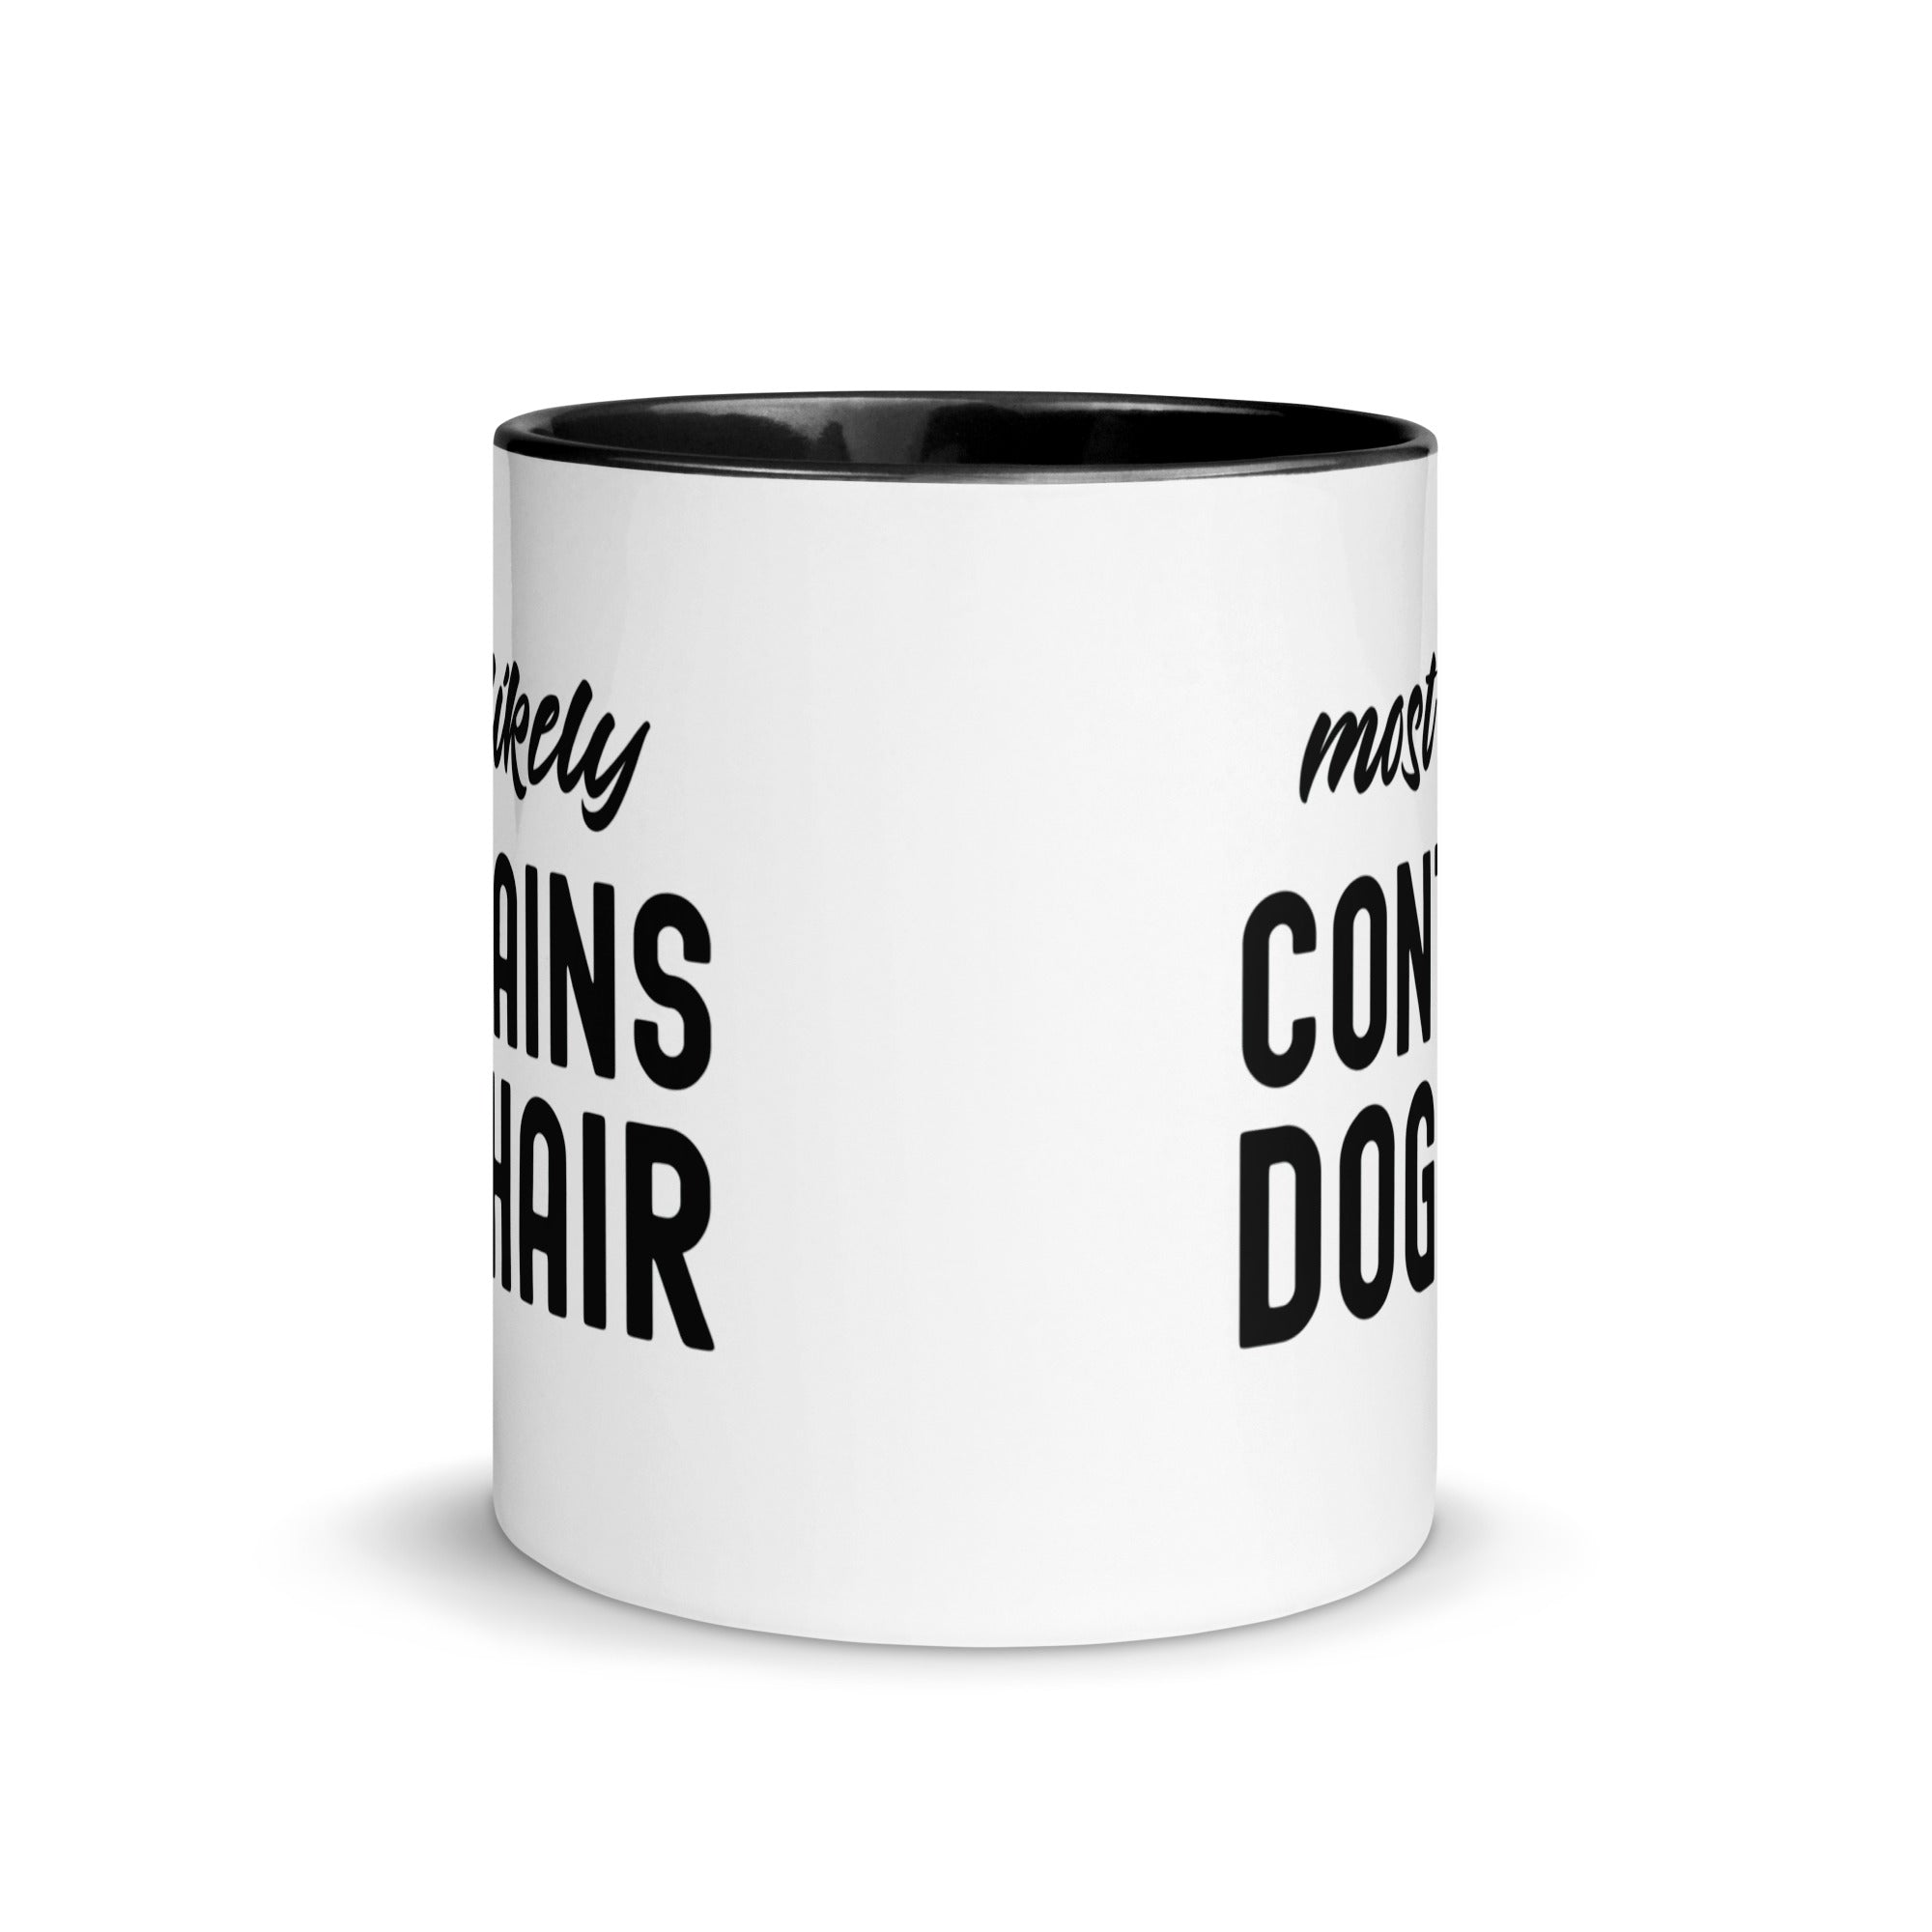 Mug with Color Inside | Most Likely Contains Dog Hair